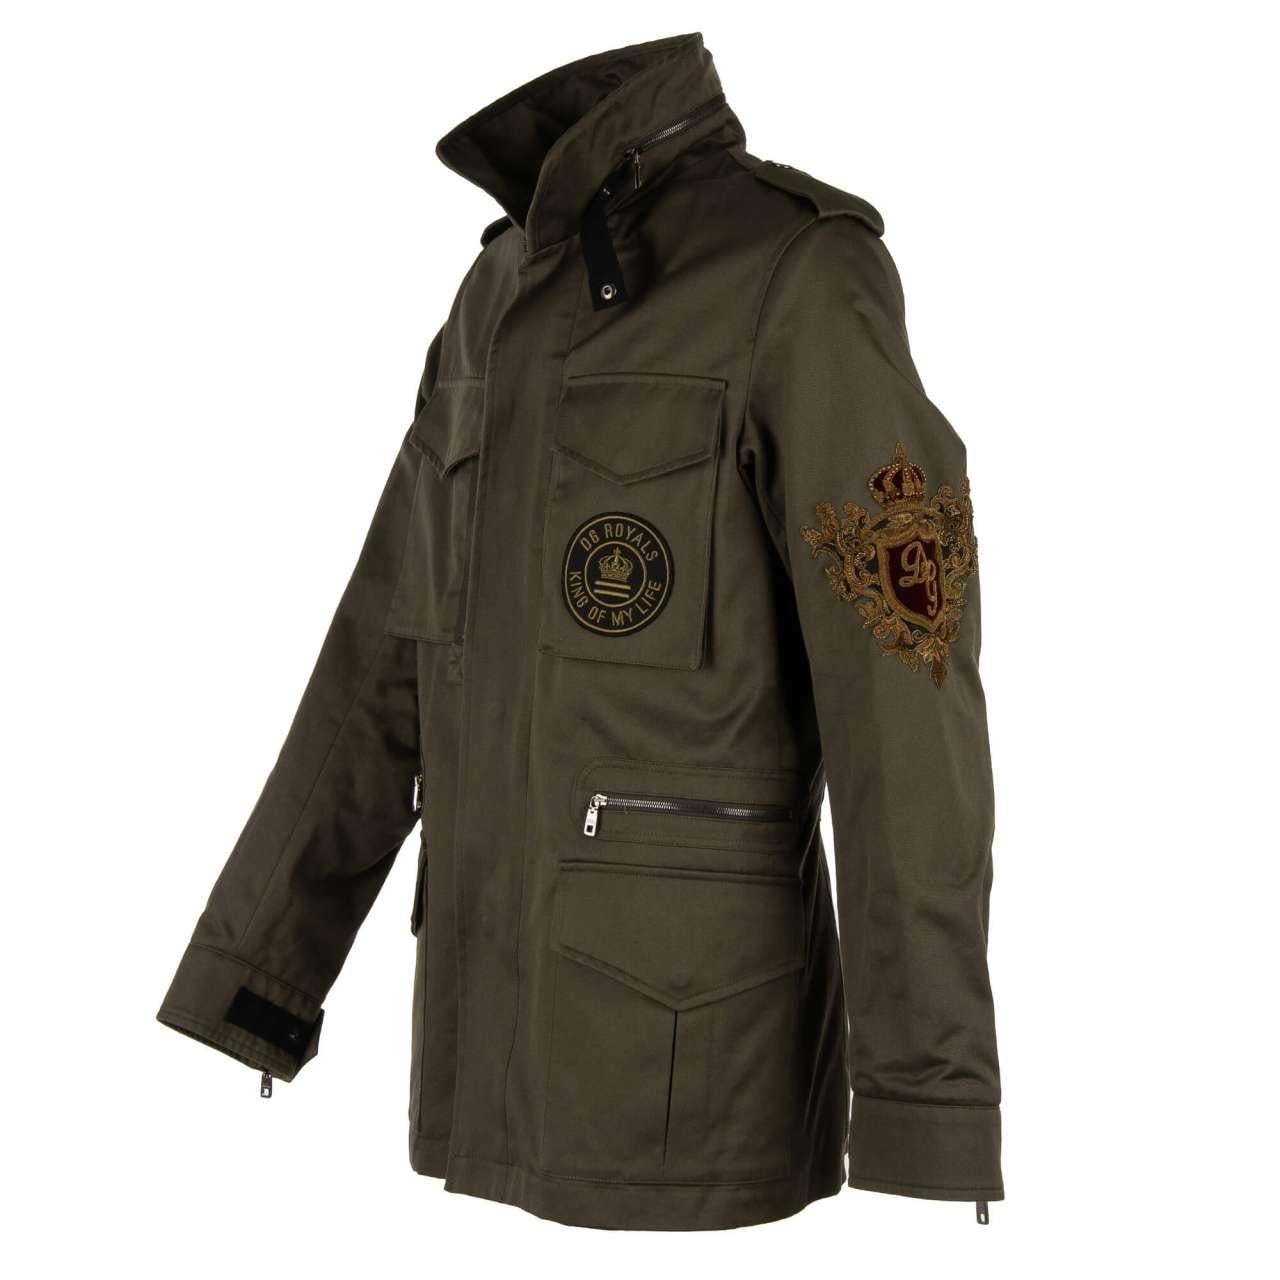 D&G Military Canvas Jacket DG LOVE with Embroidery und Pockets Khaki 54 In Excellent Condition For Sale In Erkrath, DE